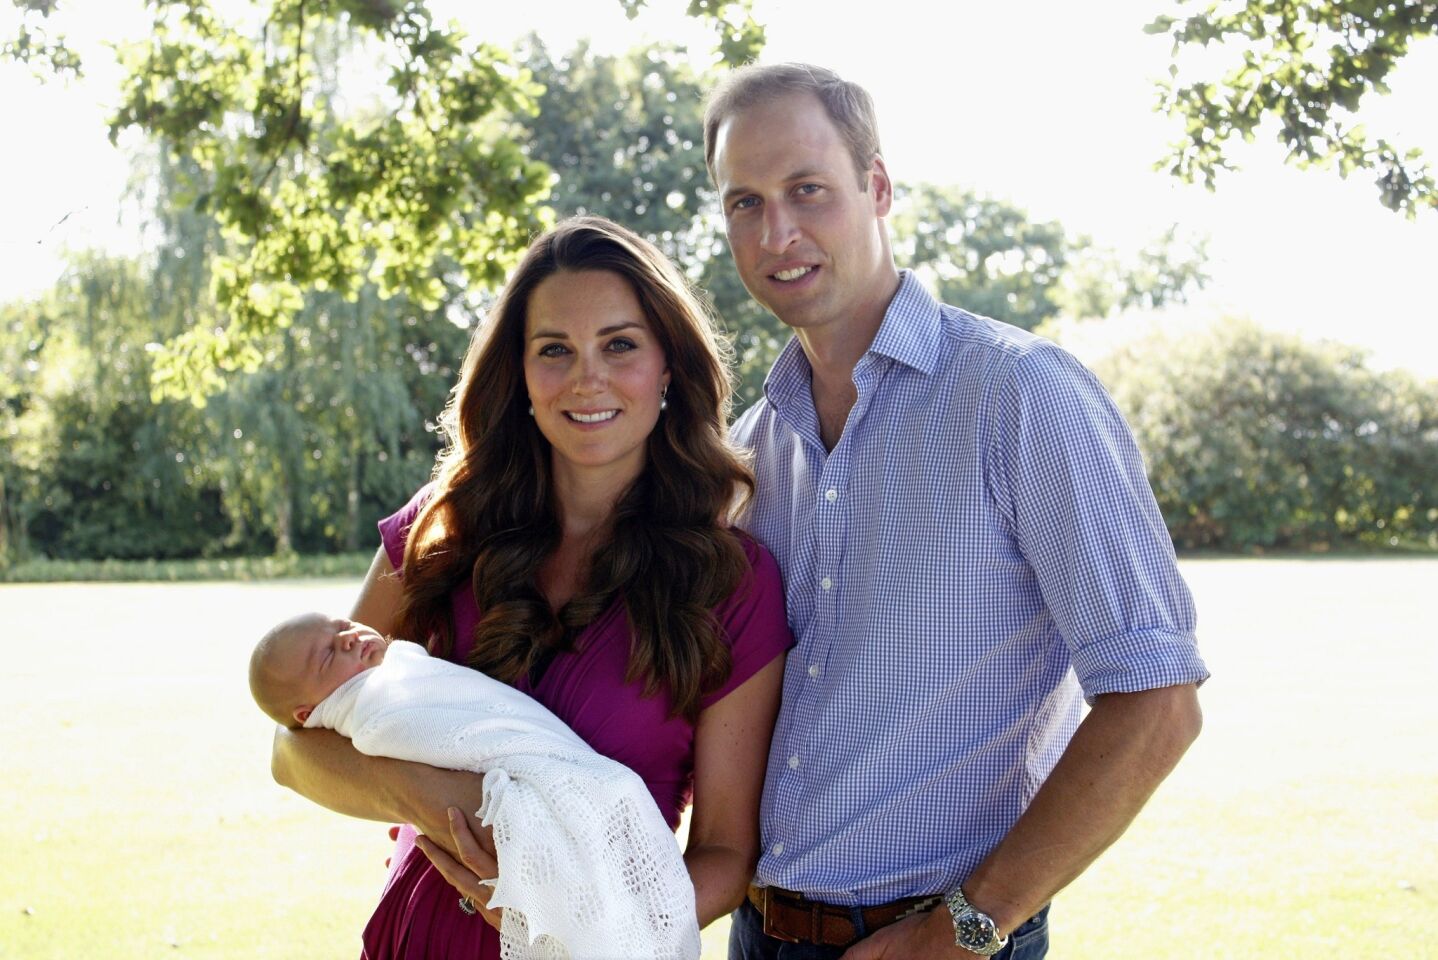 Prince William, Duke of Cambridge, and his wife, Catherine, Duchess of Cambridge, pose with their newborn baby boy, Prince George of Cambridge, at the Middleton family home in Bucklebury, Berkshire.